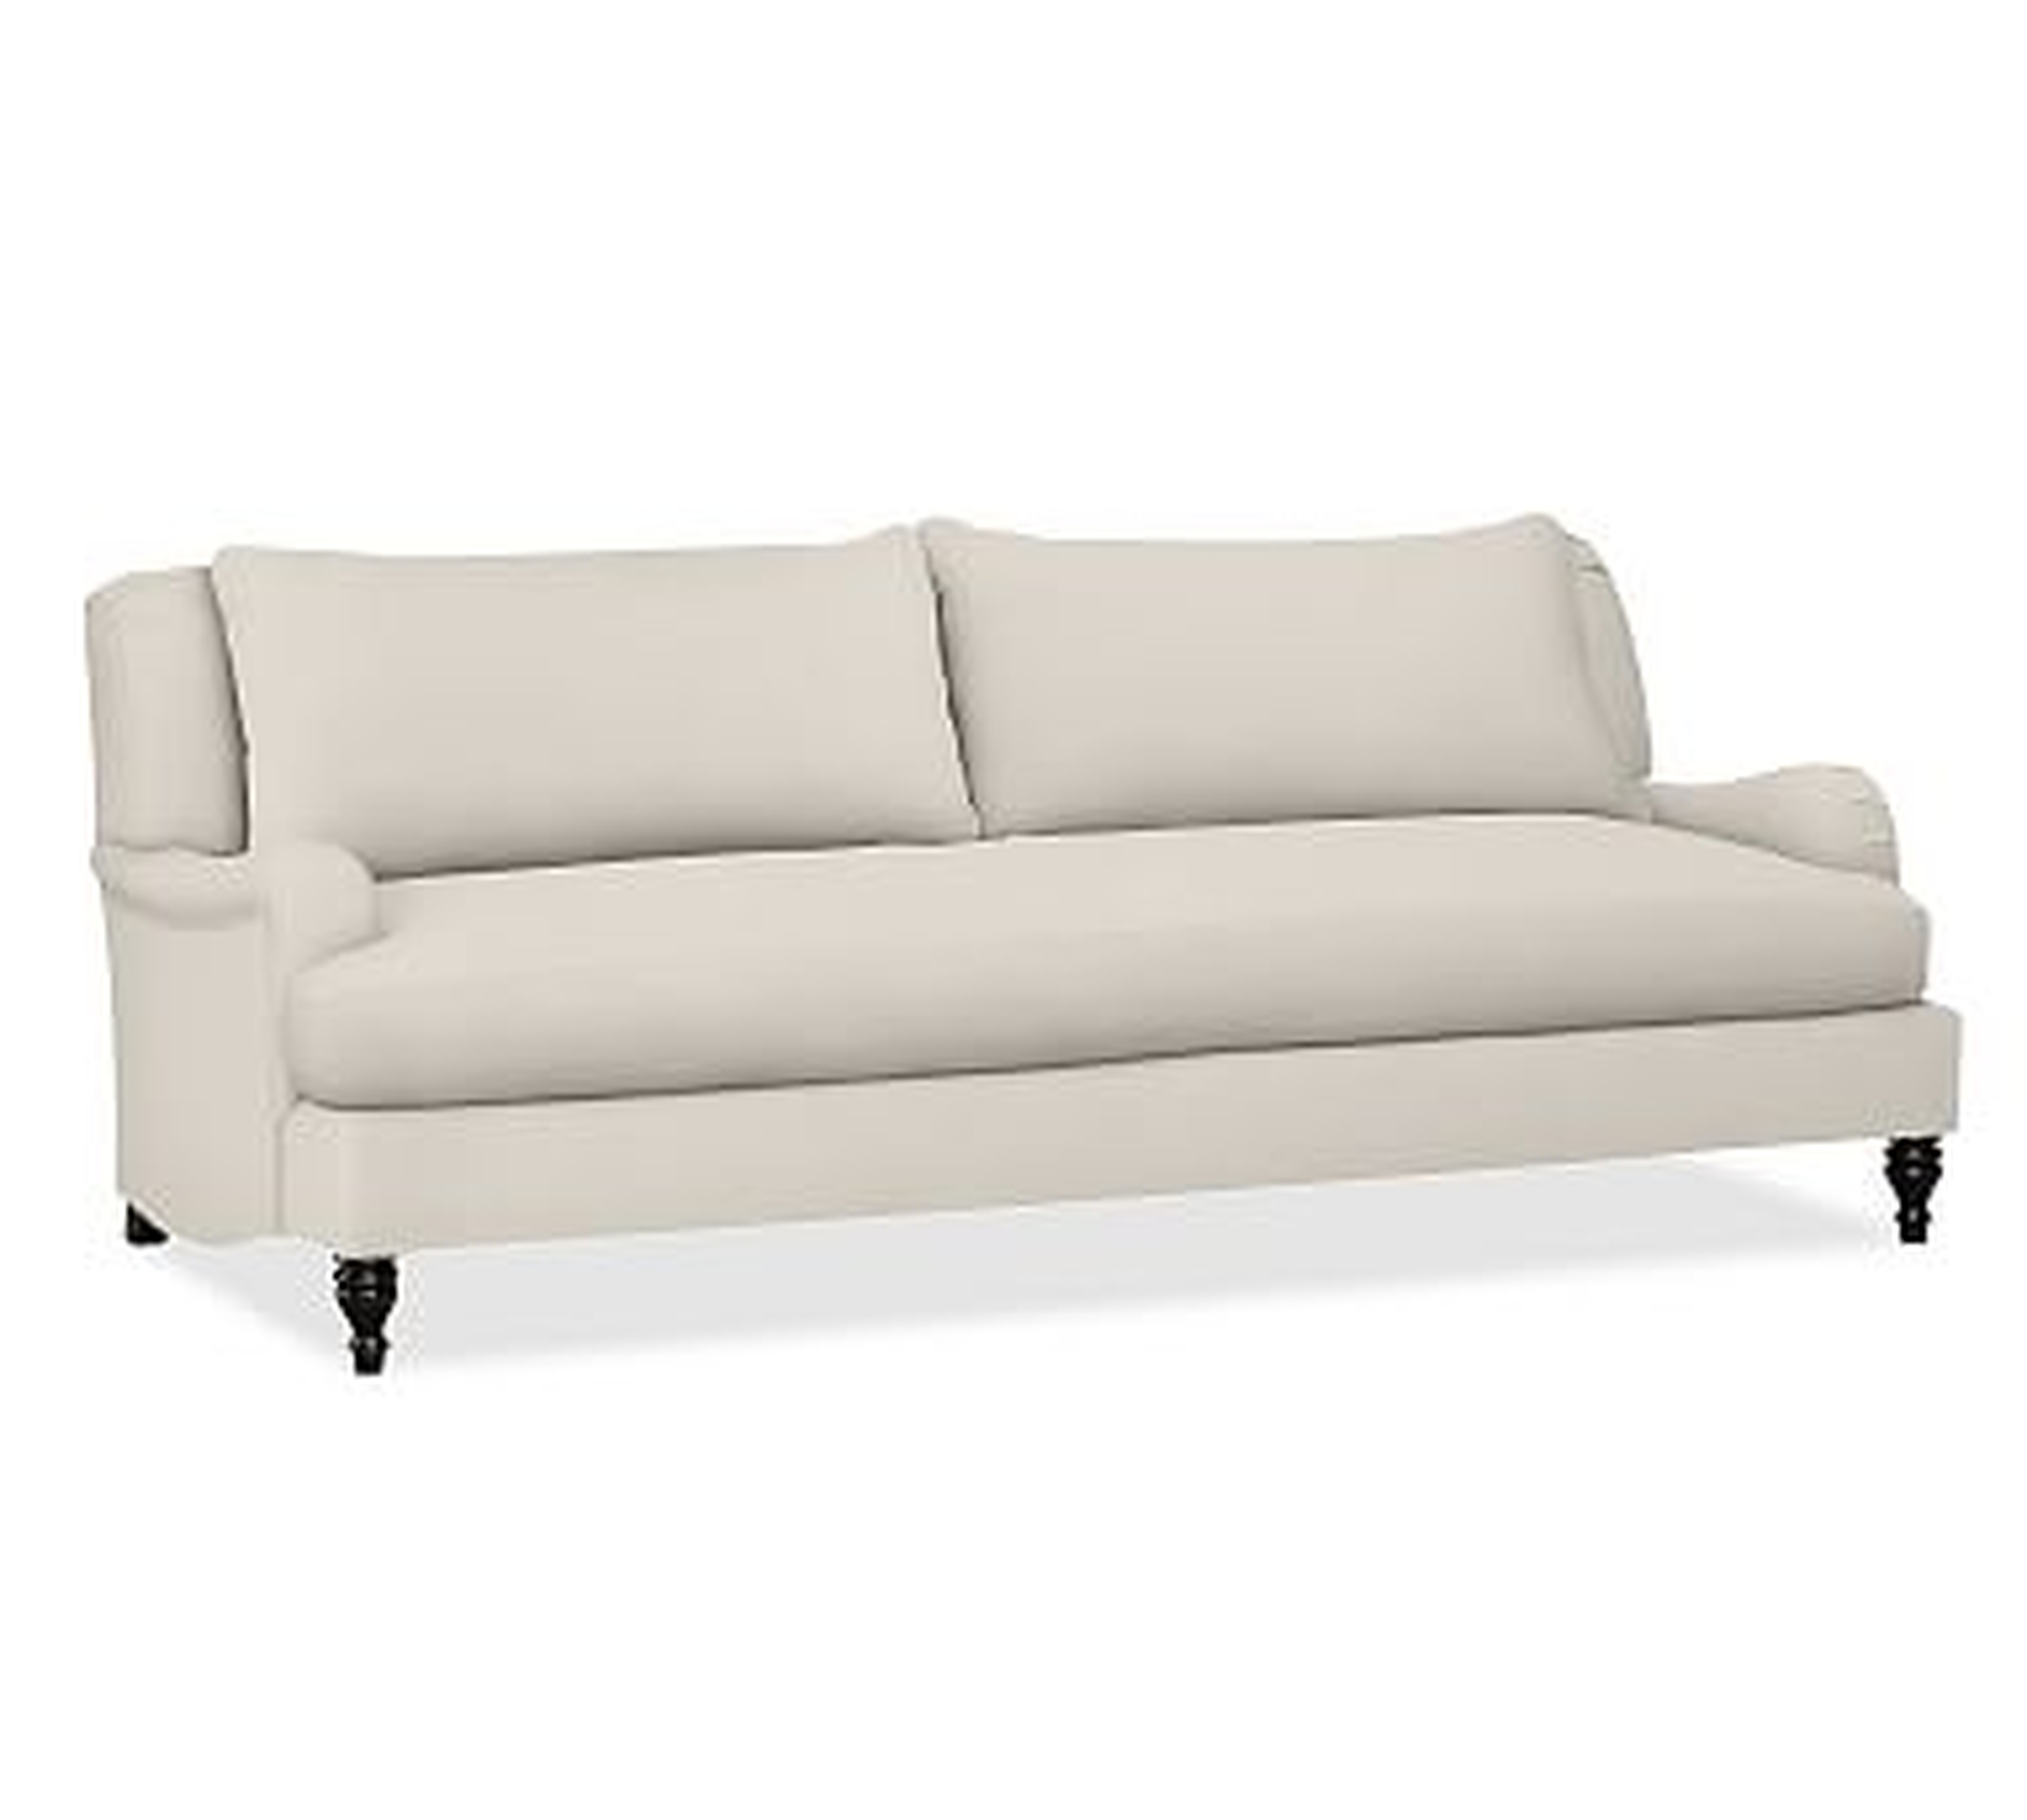 Carlisle Upholstered Grand Sofa 90.5" with Bench Cushion, Polyester Wrapped Cushions, Twill Cream - Pottery Barn